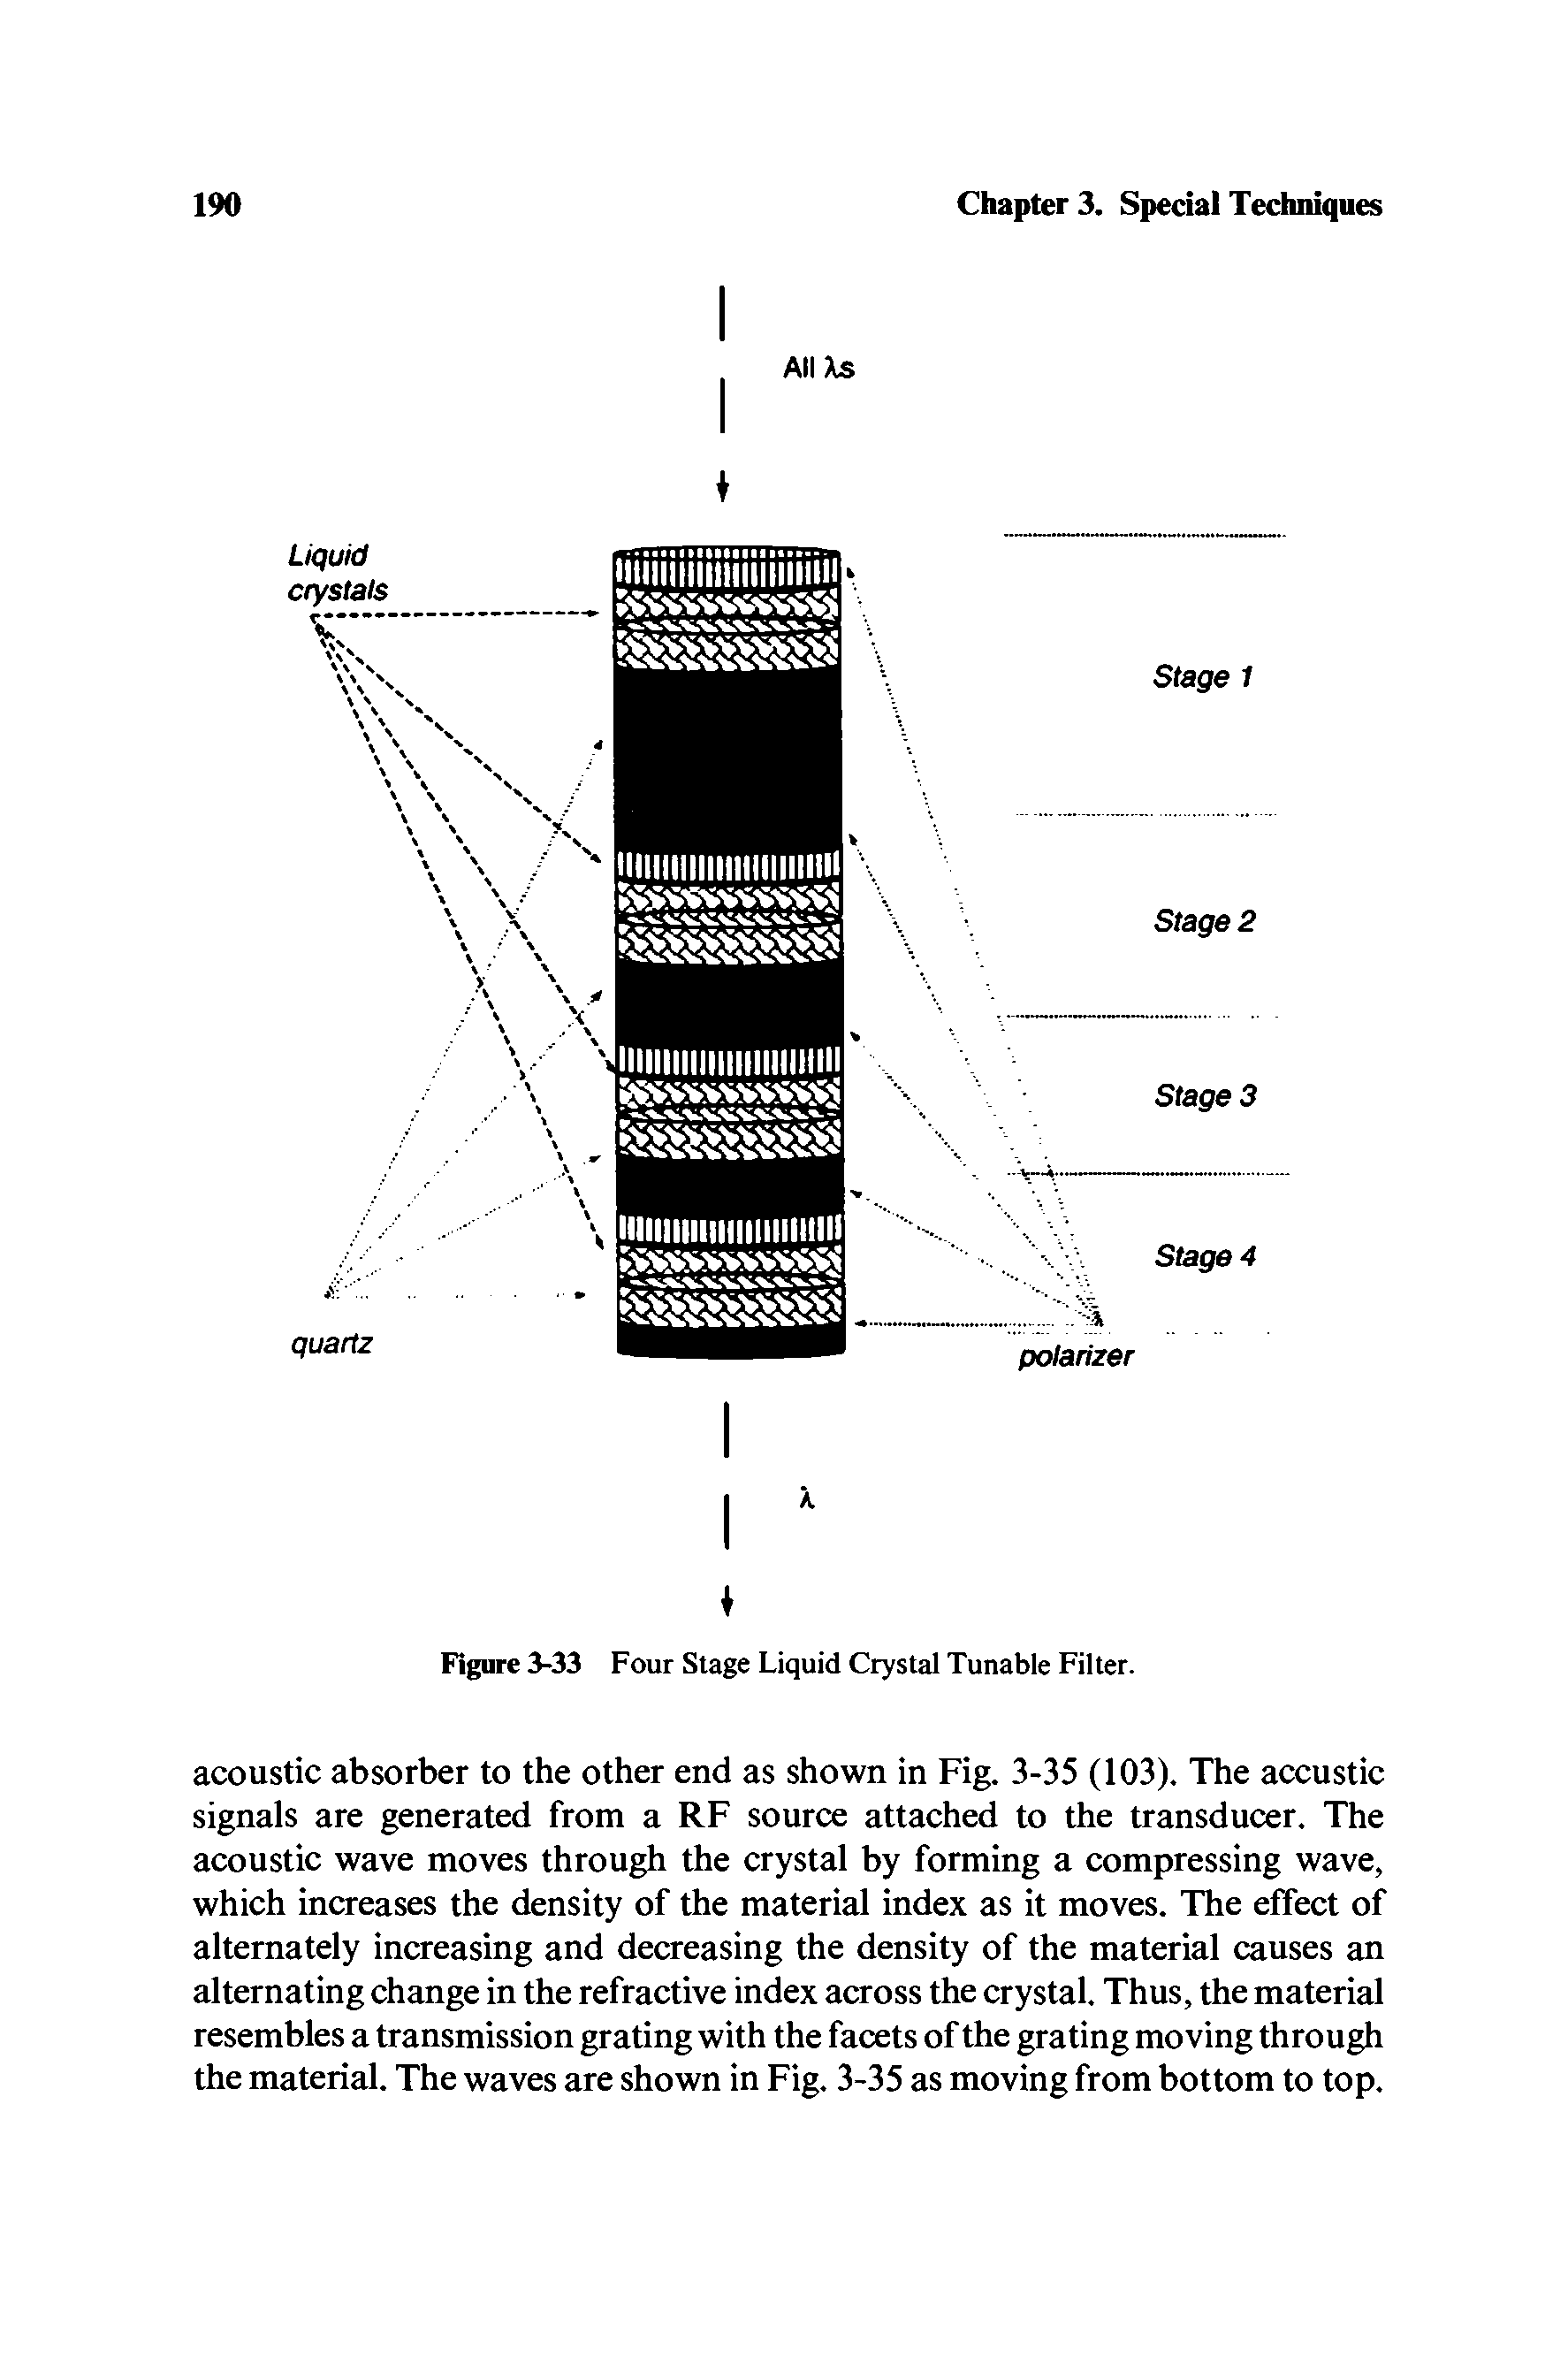 Figure 3-33 Four Stage Liquid Crystal Tunable Filter.